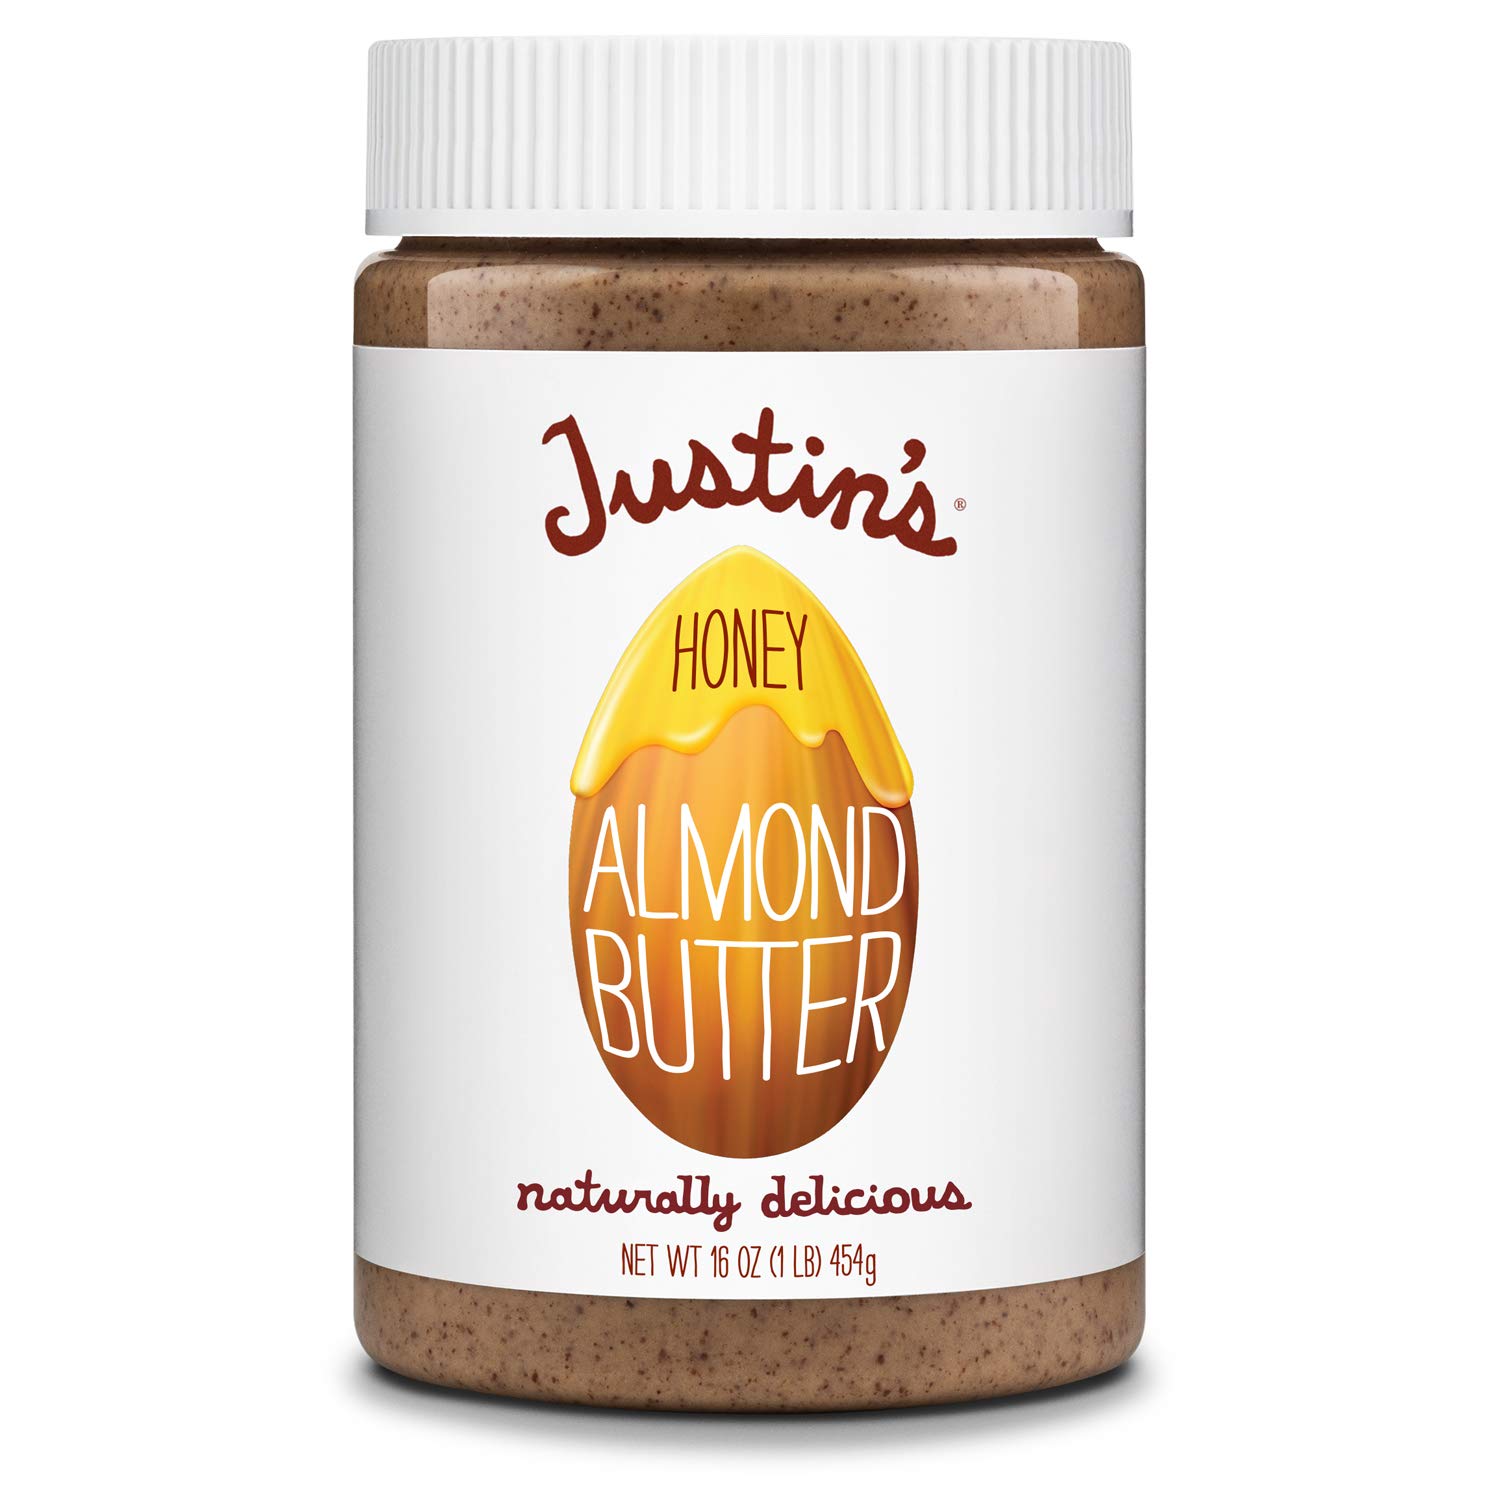 16-Oz Justin's No Stir Honey Almond Butter $4.30 w/ S&S + Free Shipping w/ Prime or on $35+